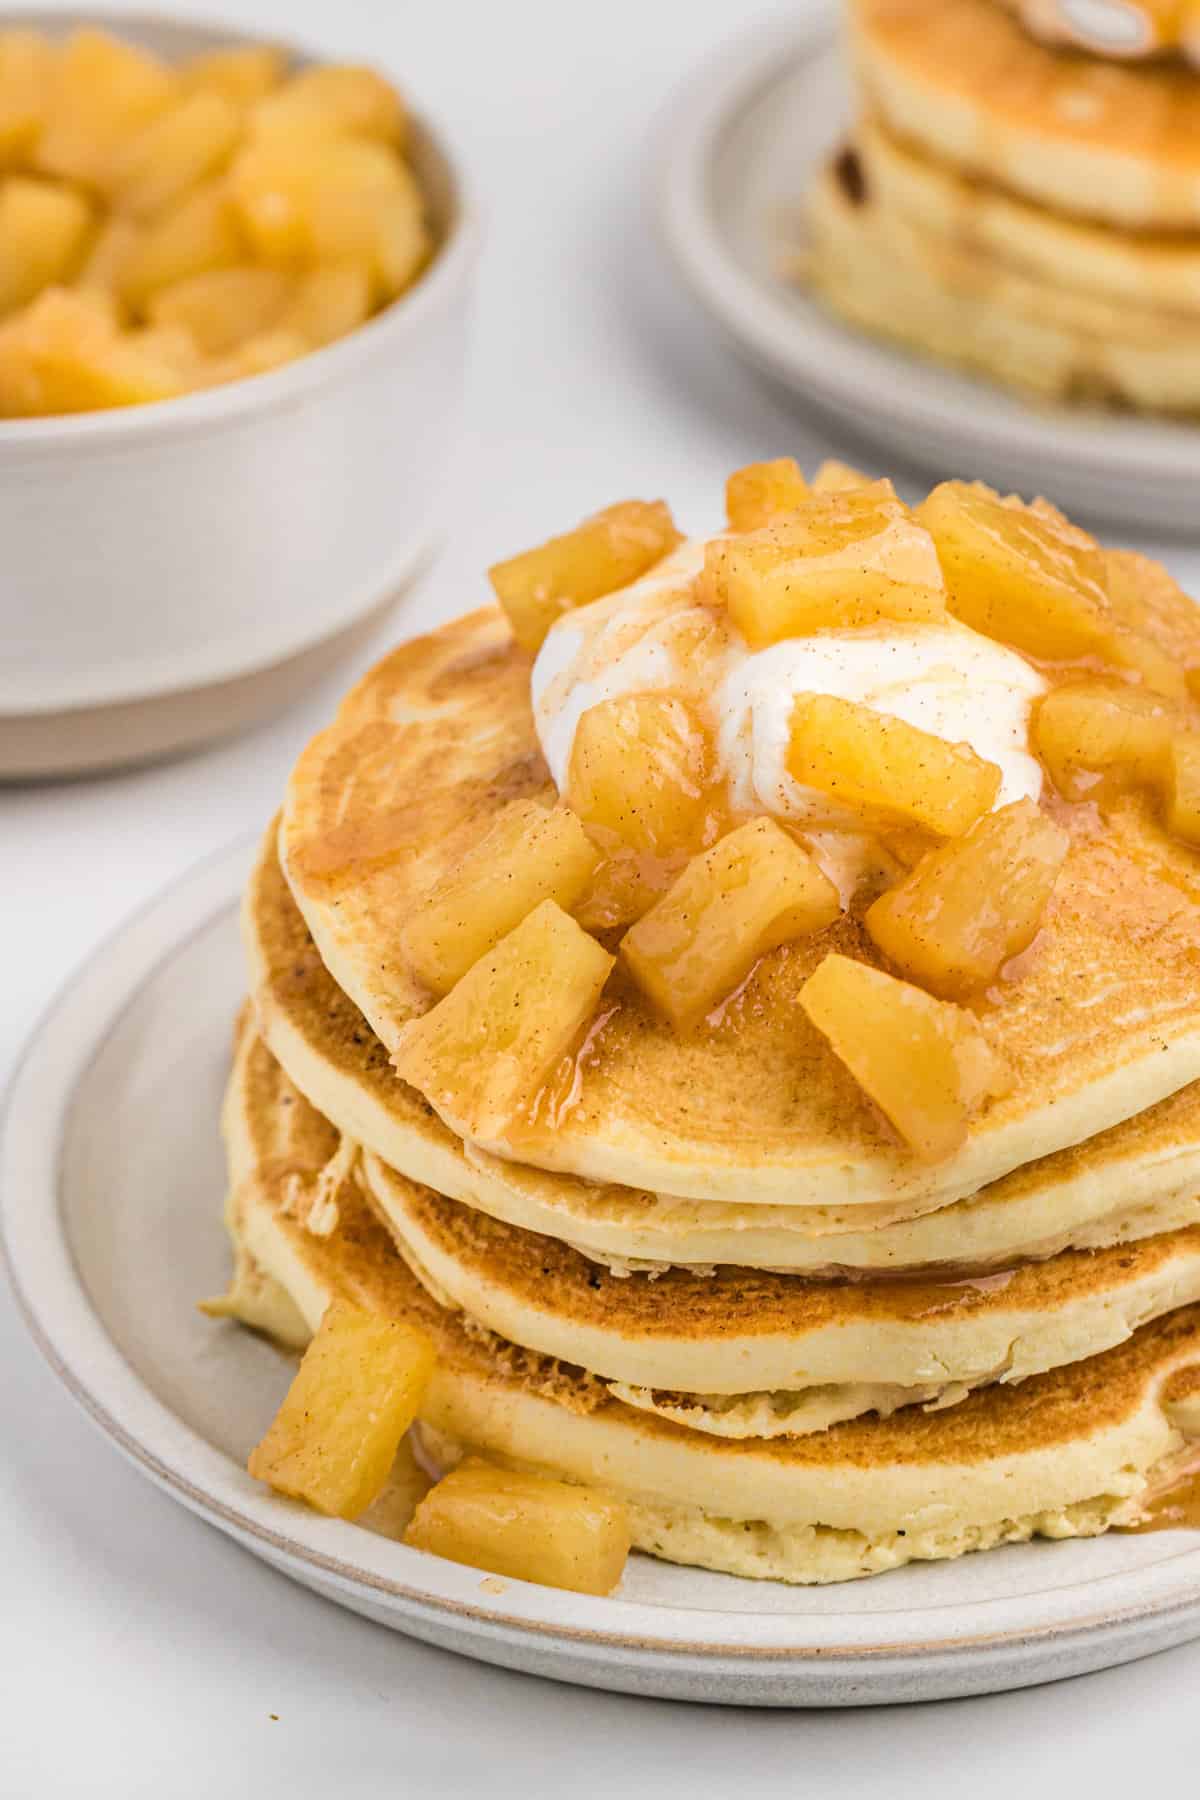 Pineapple sauce on top of stack of pancakes.